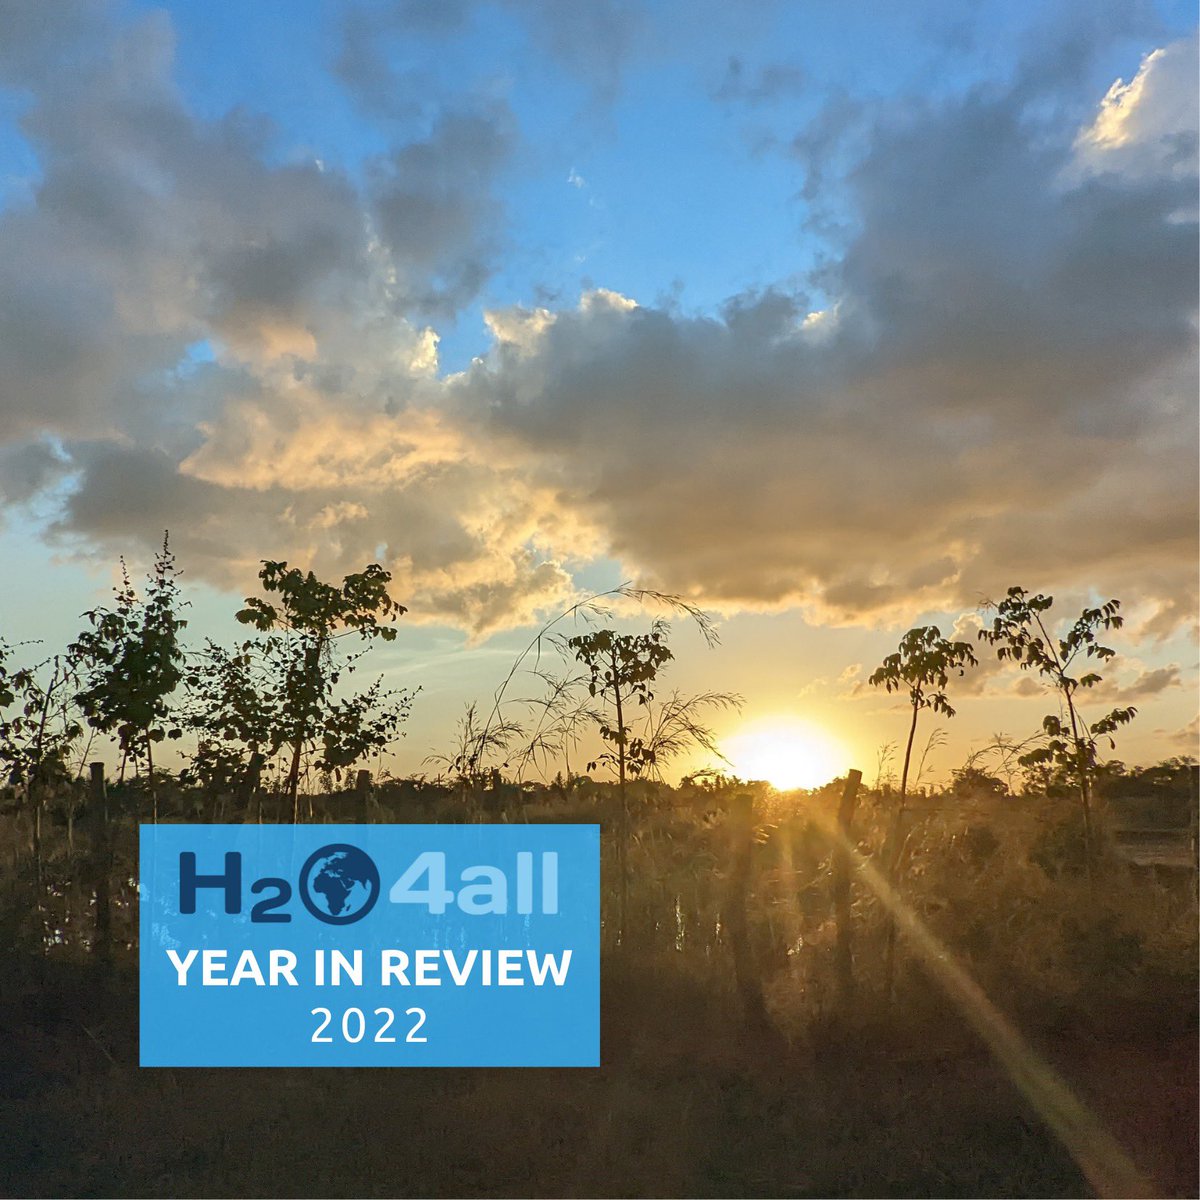 #H2O4ALLStories | Check out our December Newsletter: eepurl.com/igGPQr.

#safewater #safewaterforall #water #newsletter #yearinreview